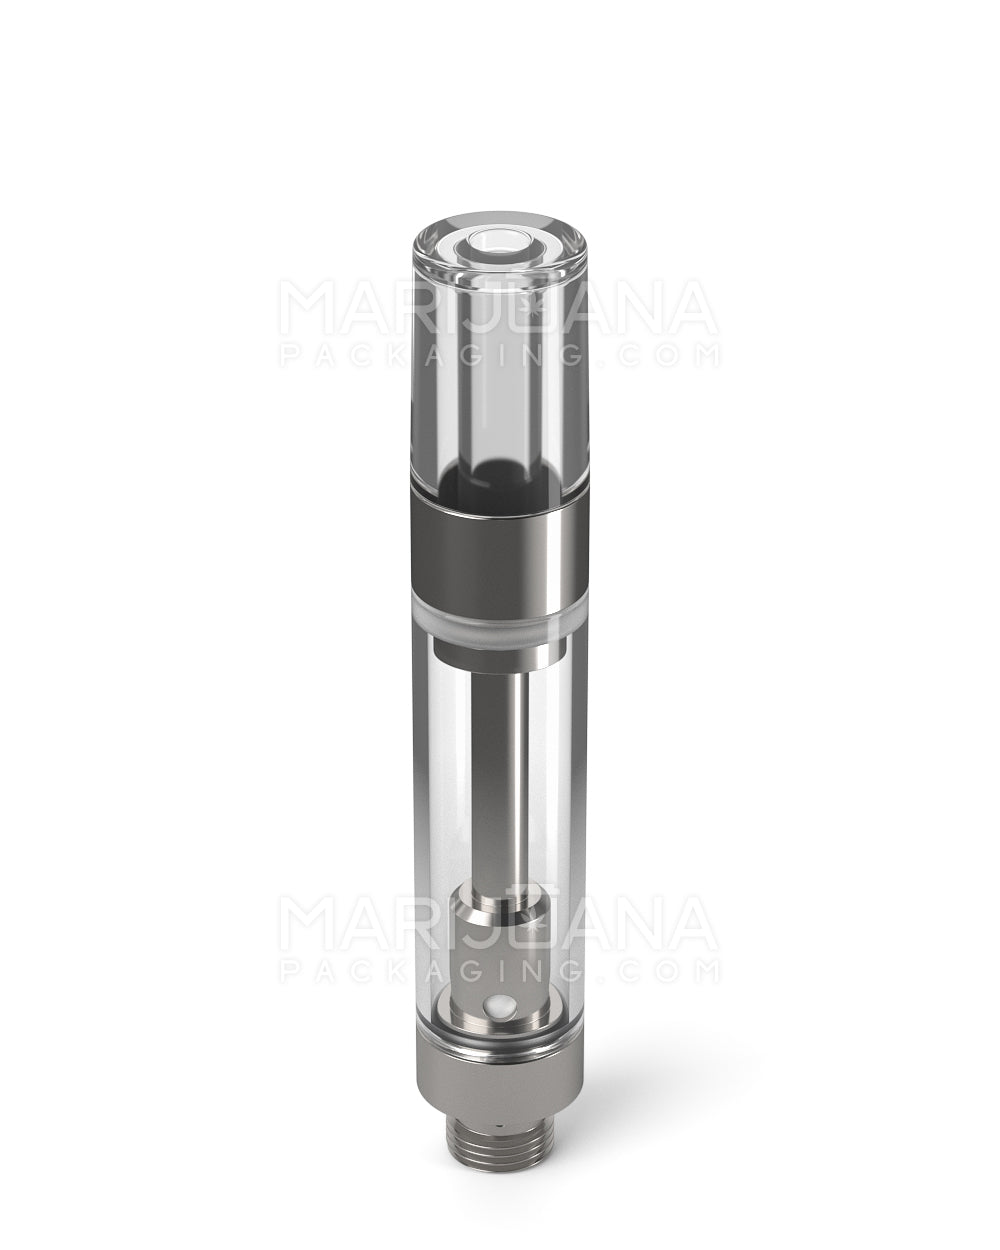 Ceramic Core Glass Vape Cartridge with Round Clear Plastic Mouthpiece | 1mL - Press On - 1200 Count - 3